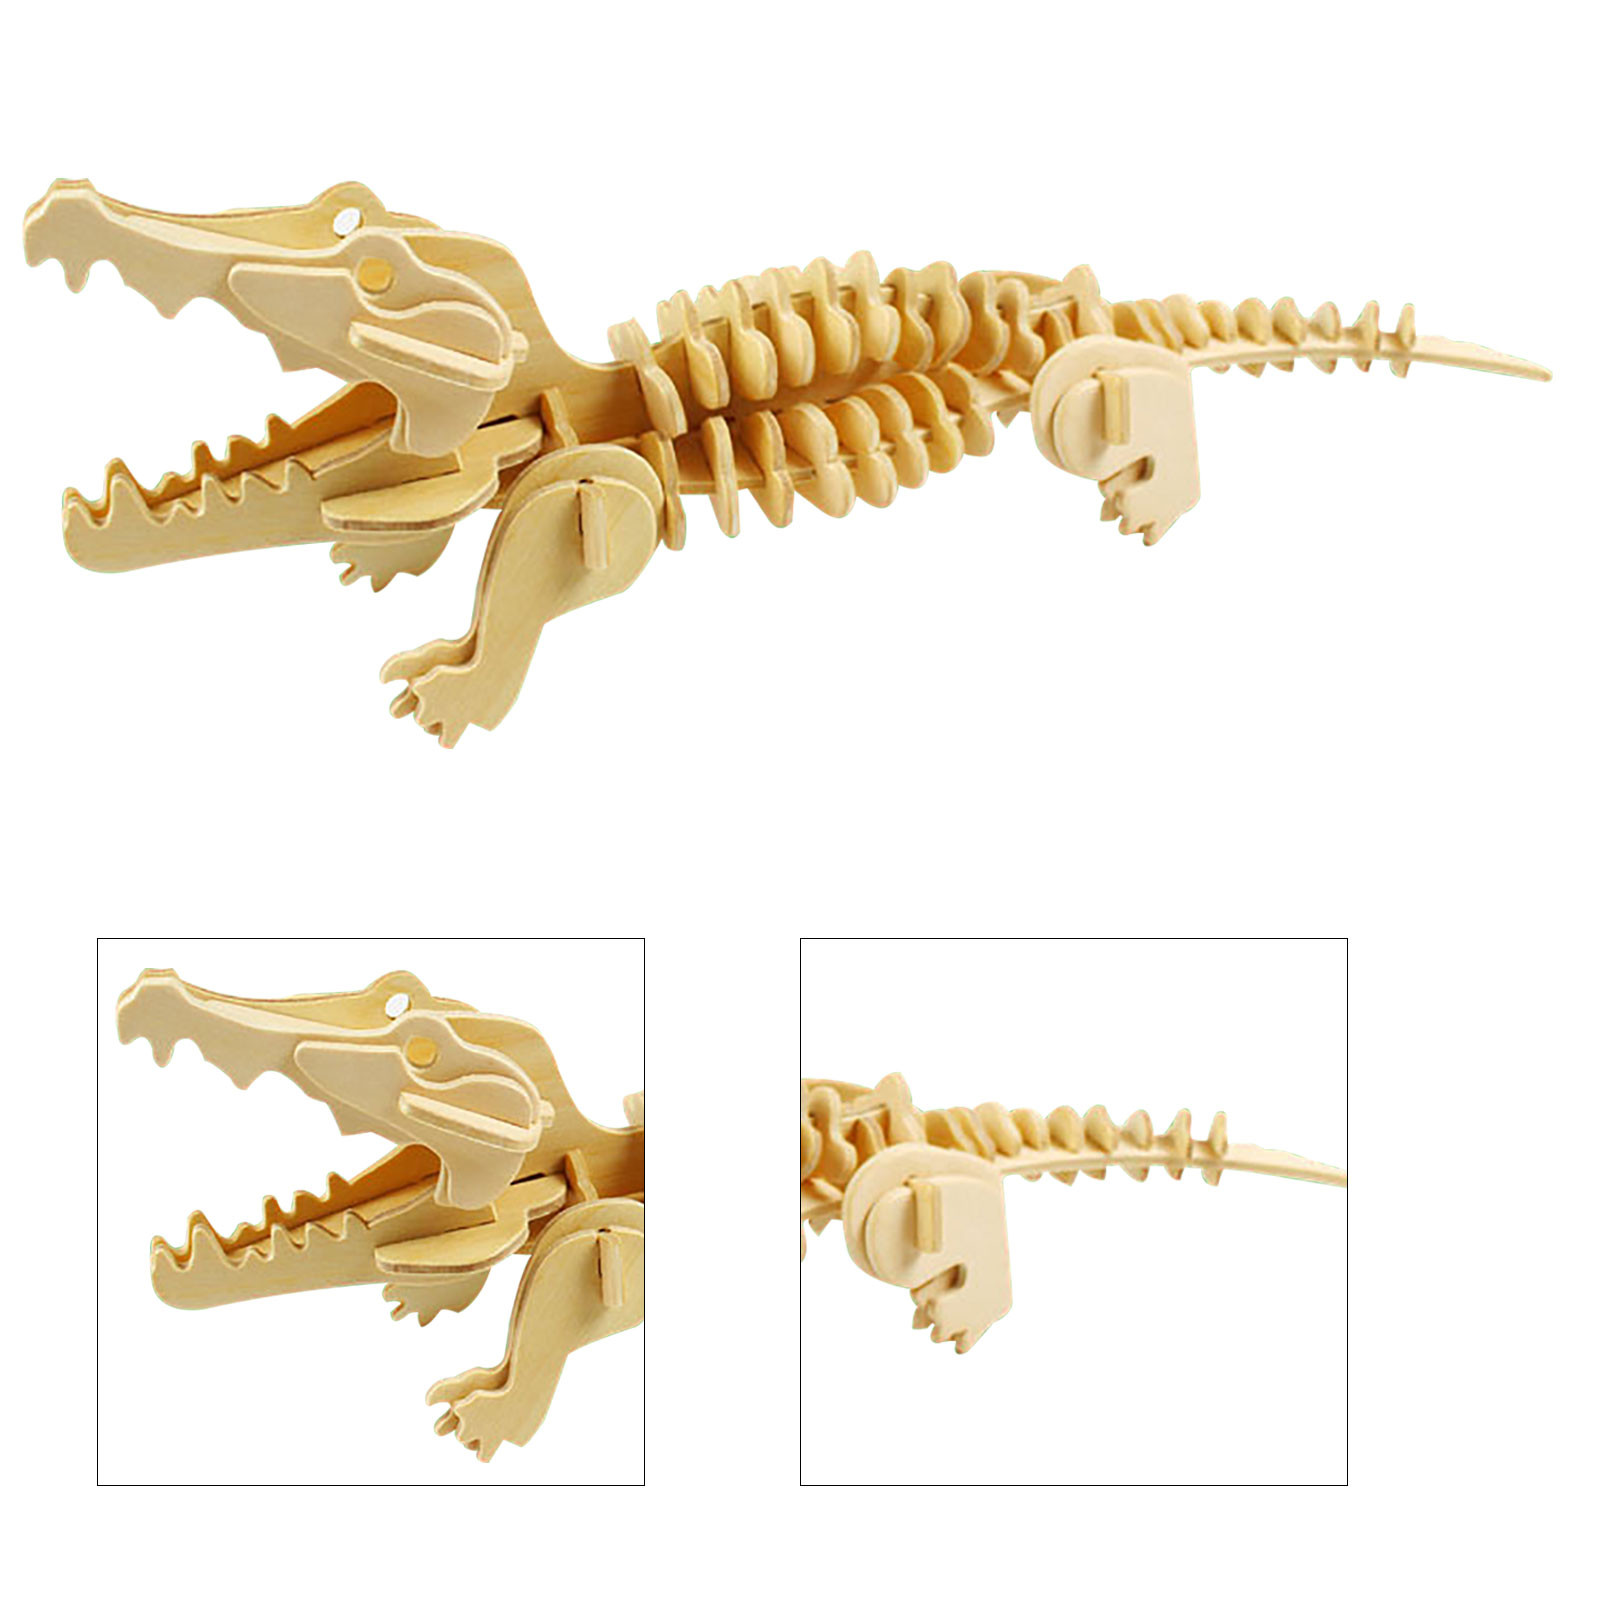 New Wood Assembly DIY Toy for 3D Wooden Model Puzzles of Animals Crocodile 